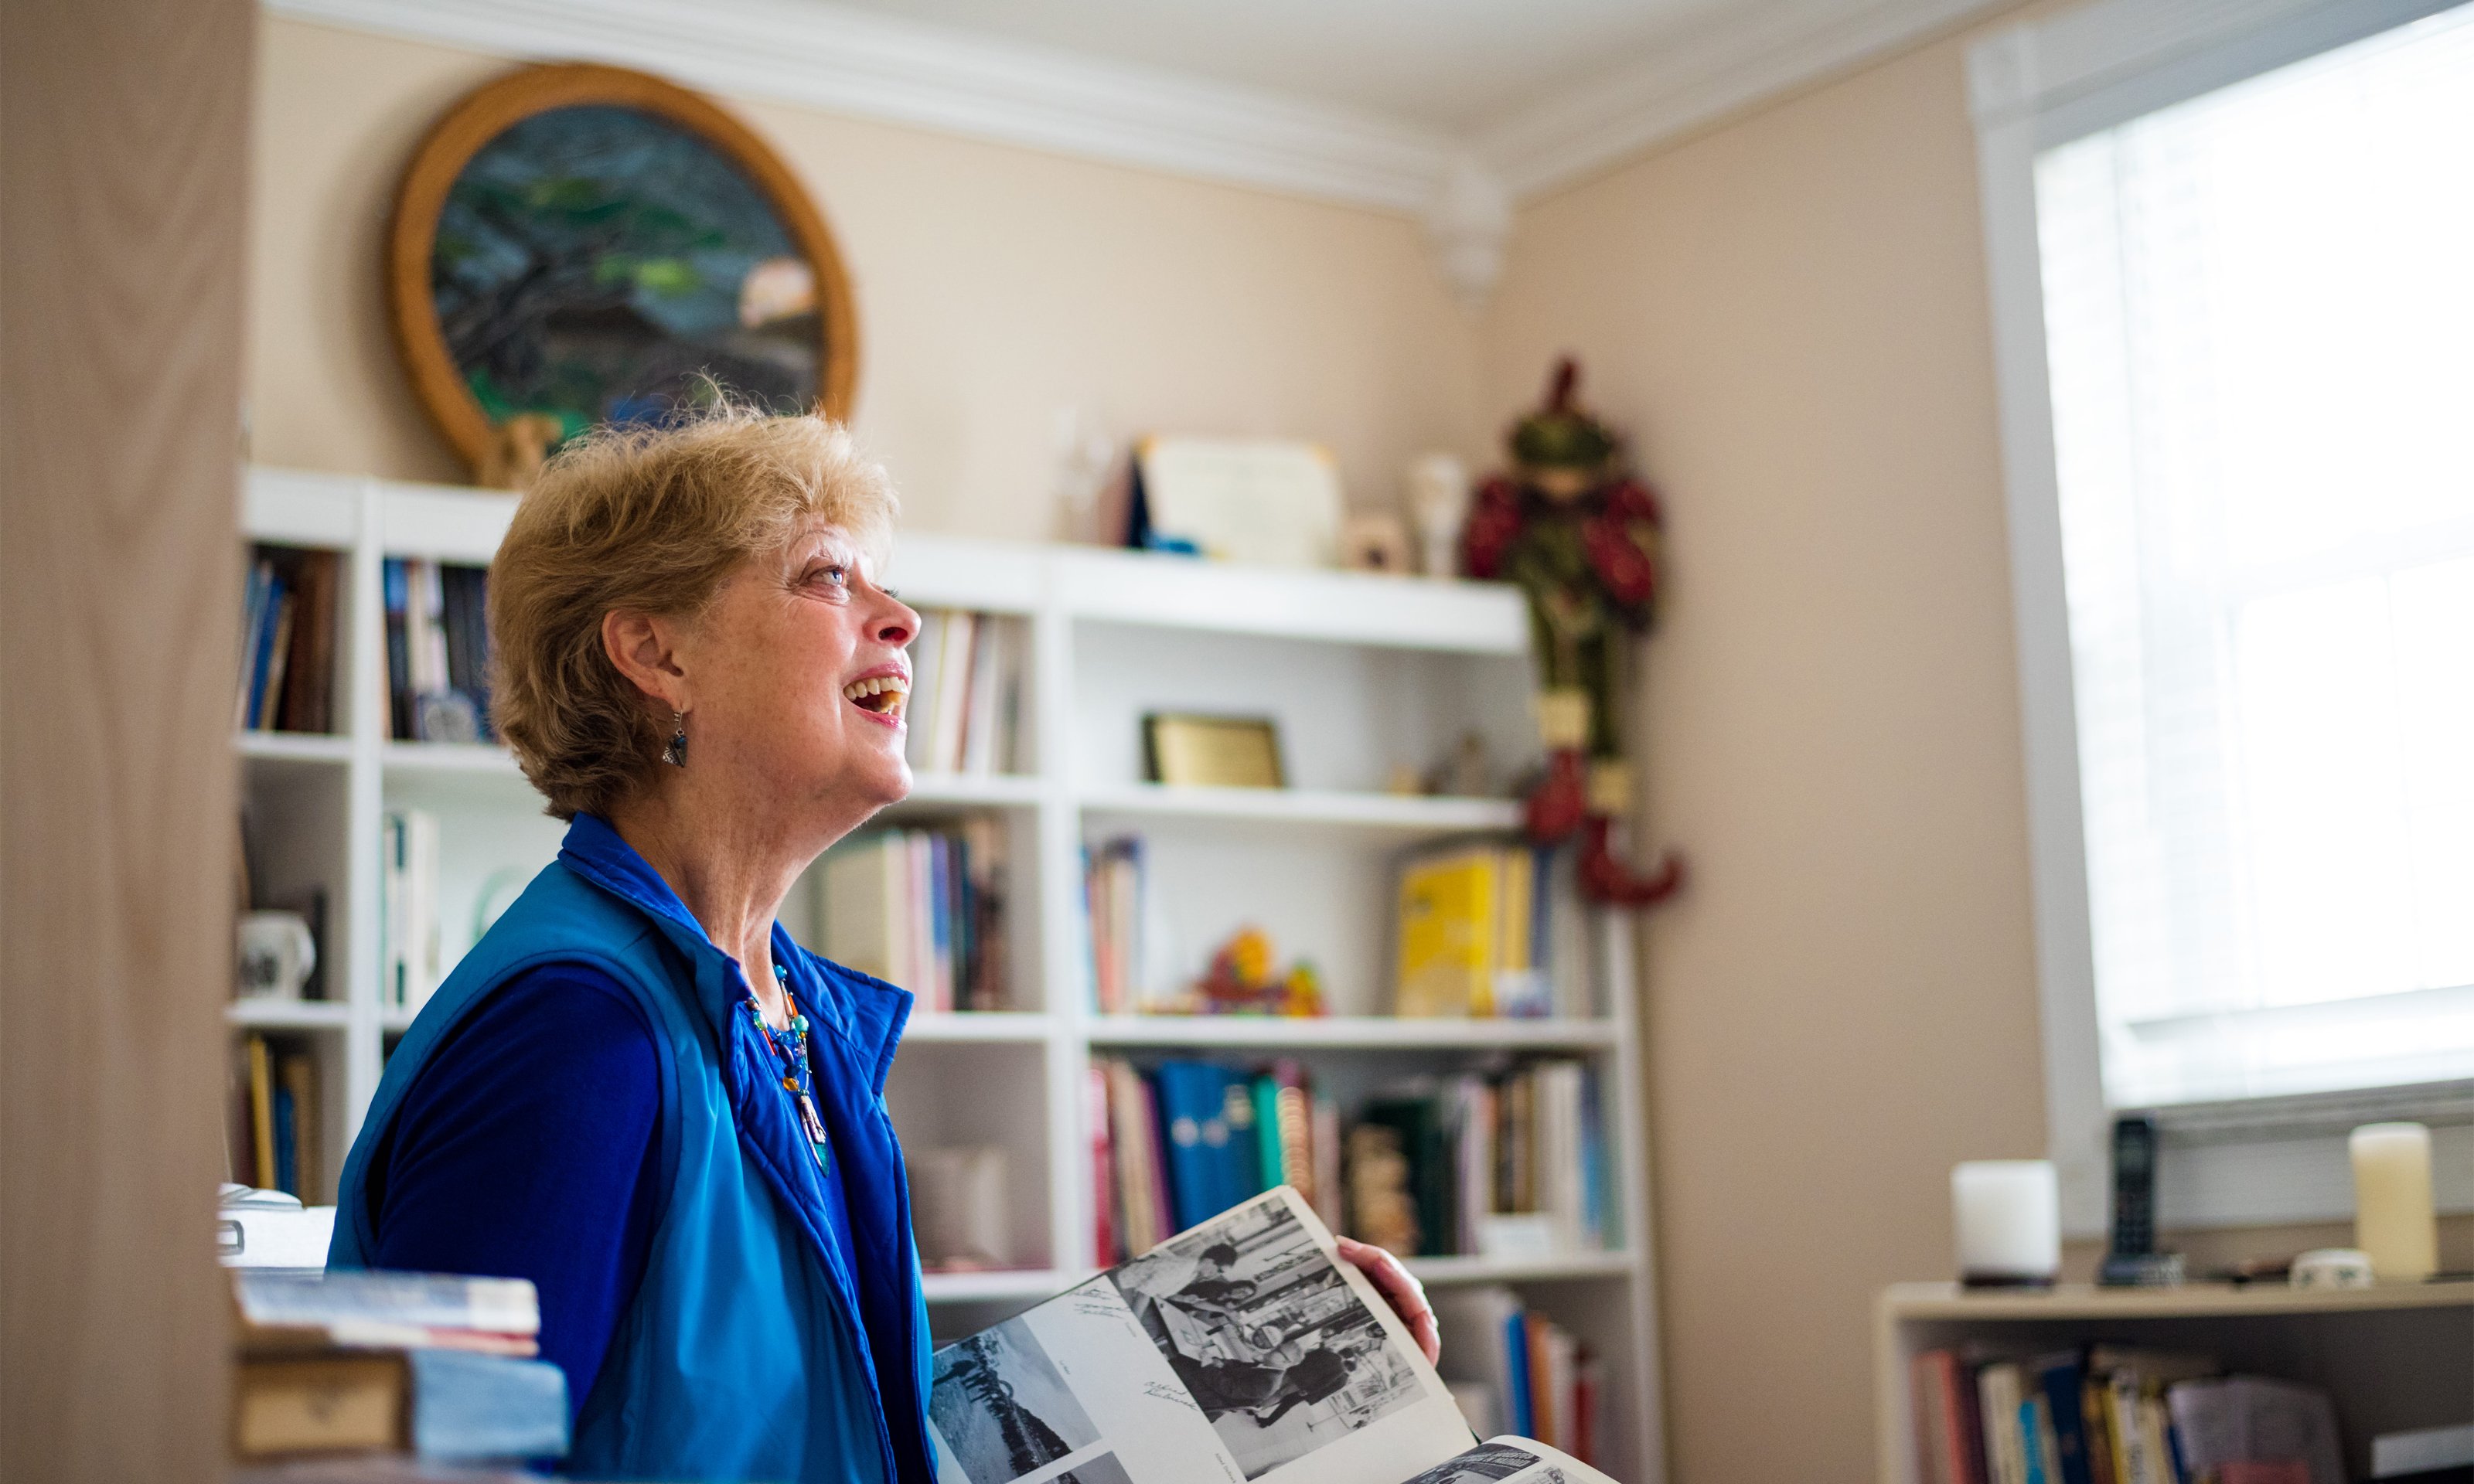 Oakland University alumna Kate Thoresen looks at an old yearbook in her home